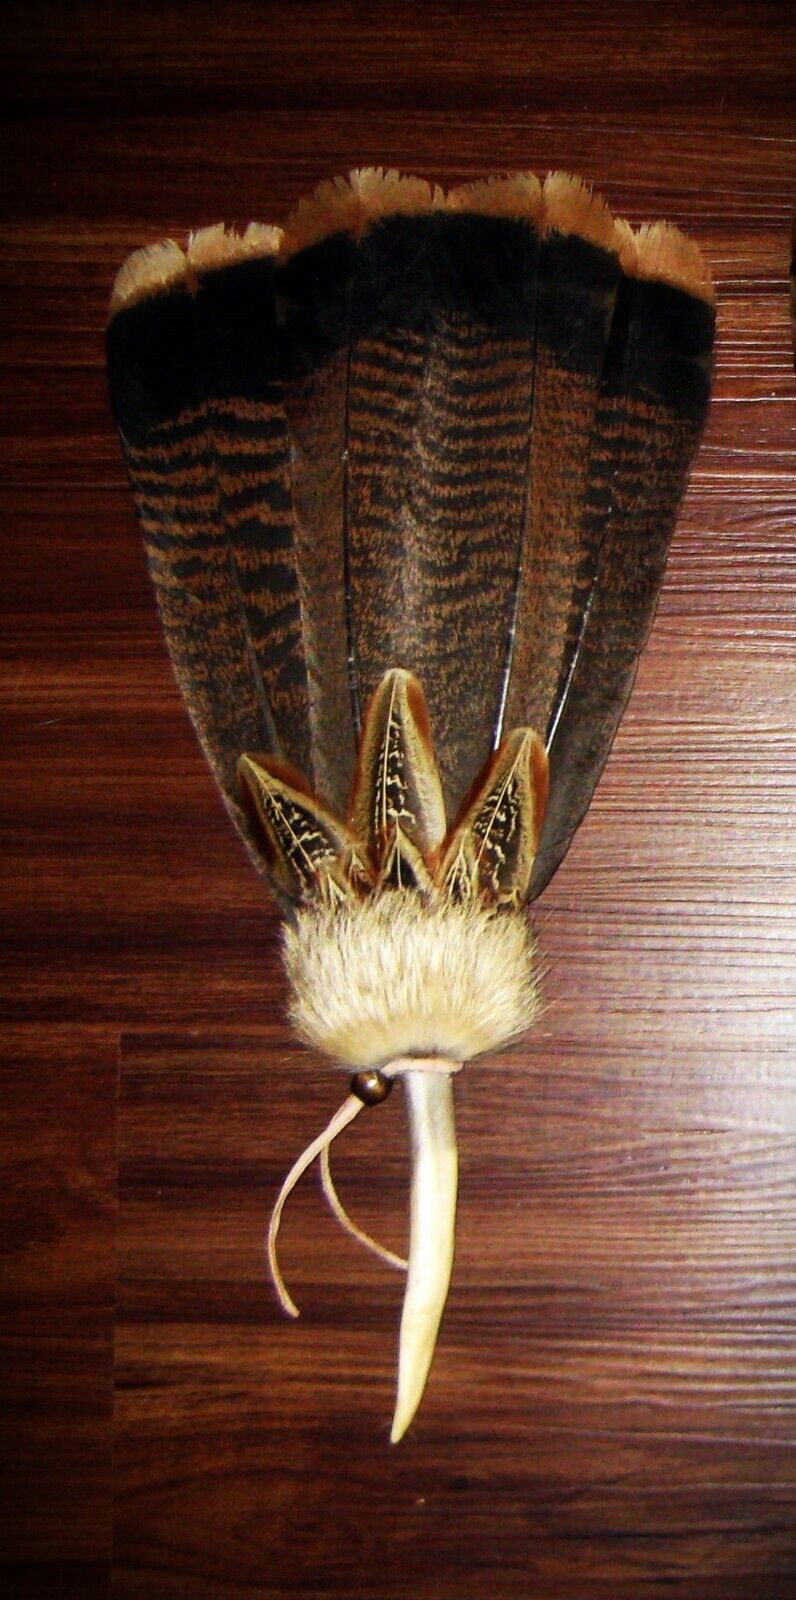 TURKEY NATIVE AMERICAN SMUDGE FAN FEATHER ANTLER CEREMONIAL